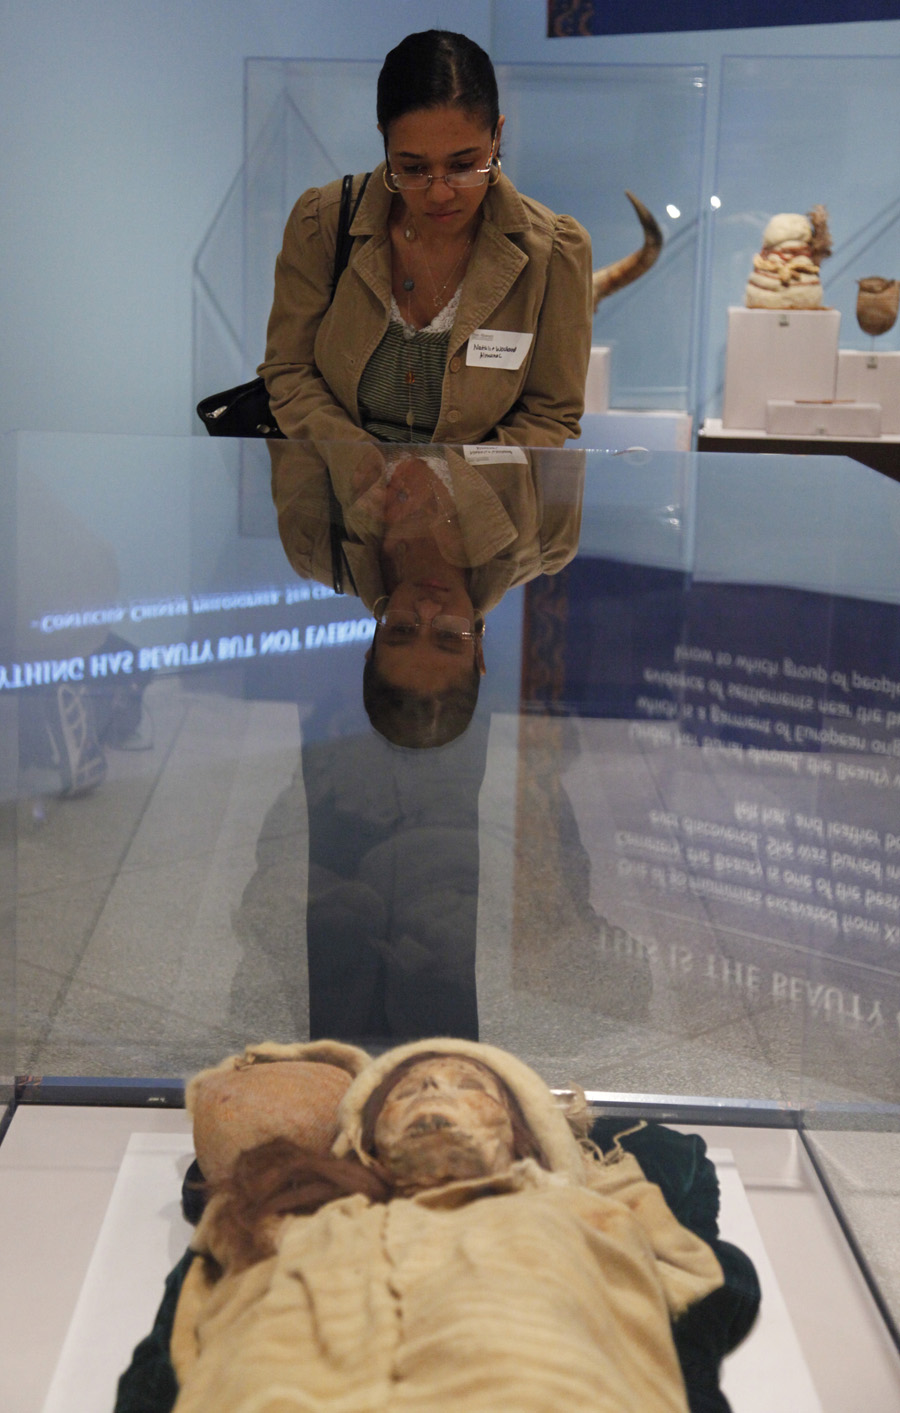 A visitor views a 3800-year-old mummy during an exhibition featuring archeological findings in northwest China&apos;s Xinjiang Uygur Autonomous Region at the museum of Pennsylvania University in Philadelphia, Feb. 18, 2011. It is the third leg of the exhibition in the U.S., which will last until March 28, 2011. [Xinhua]